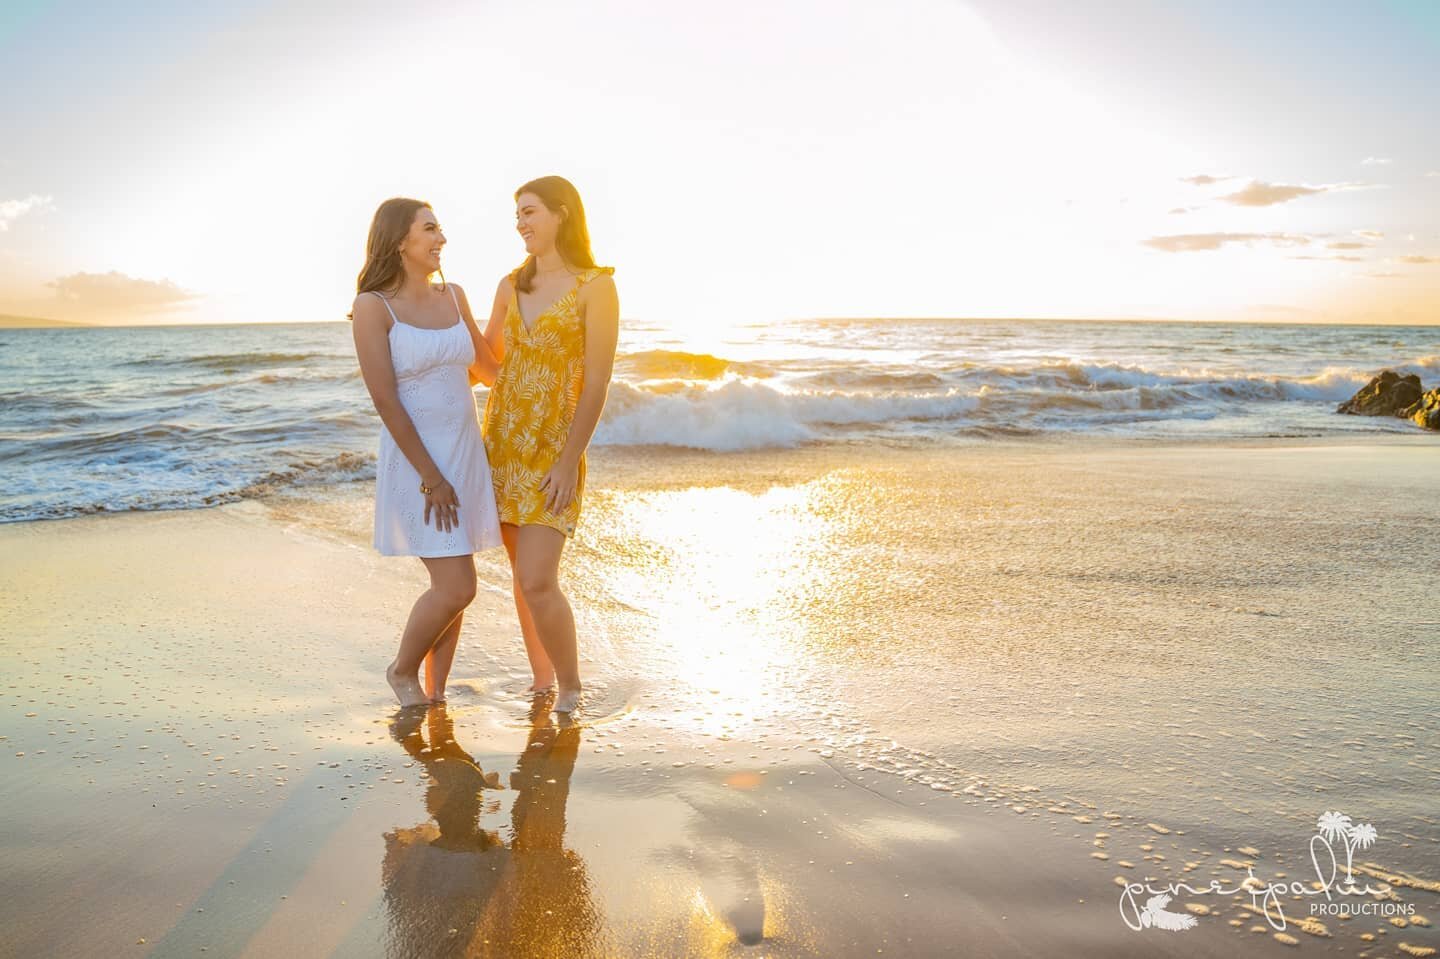 When your lucky BFF gets to come to Maui with you, of course you'll want to remeber that forever too!! ❤🌺🤙

Going through some sets from a few months ago and just realized that these two beauties actually killed a mini besties shoot within a family